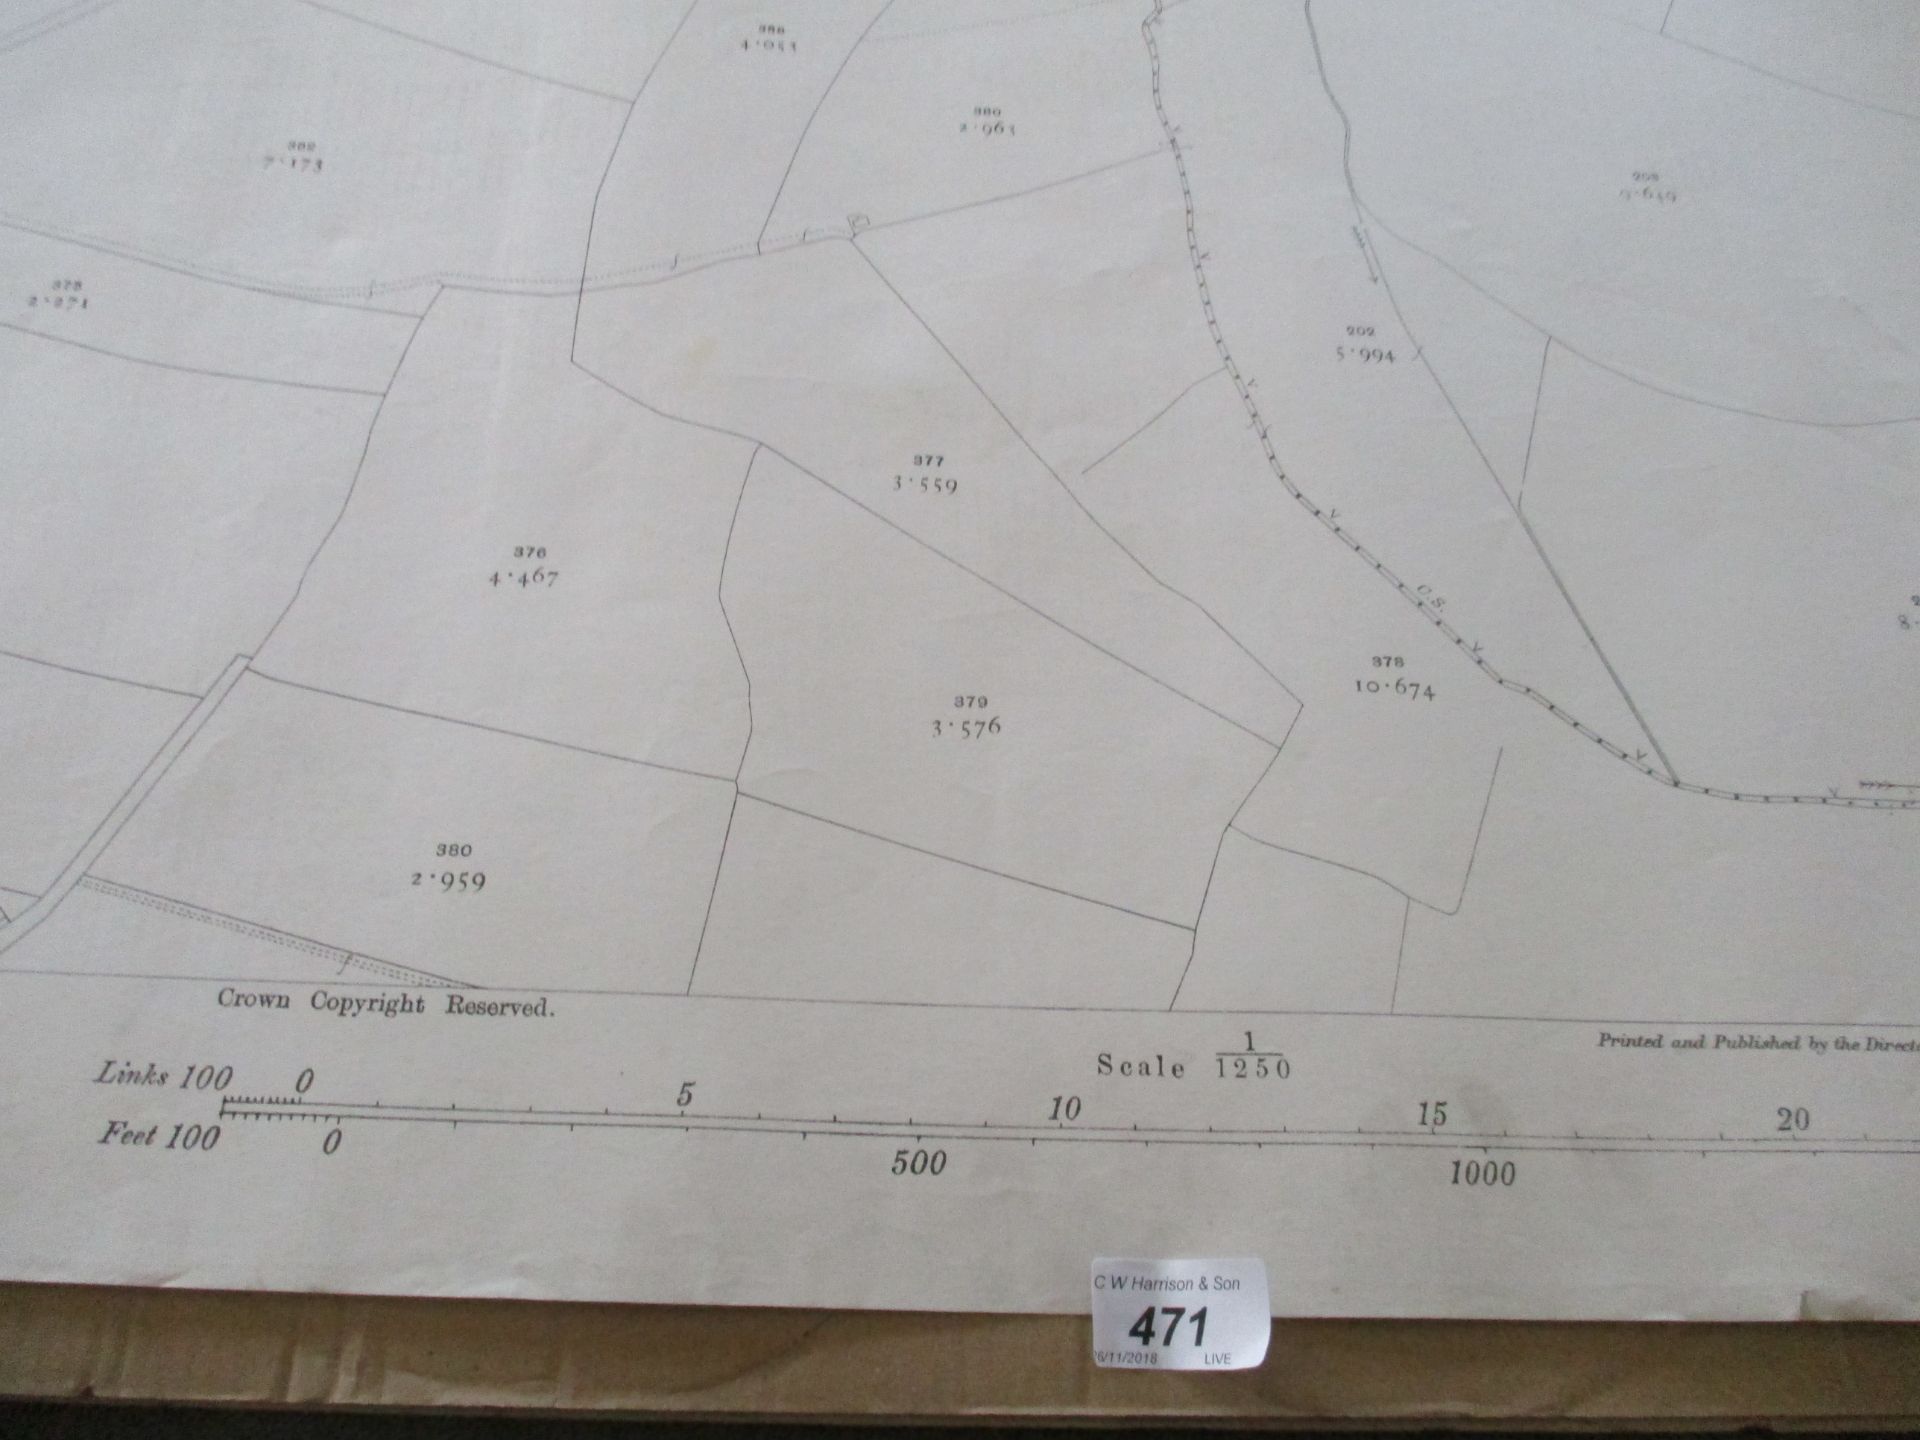 9 x ordnance survey maps relating to the Wakefield area scale 1/1250 each 74 x 104cm published by - Image 8 of 17